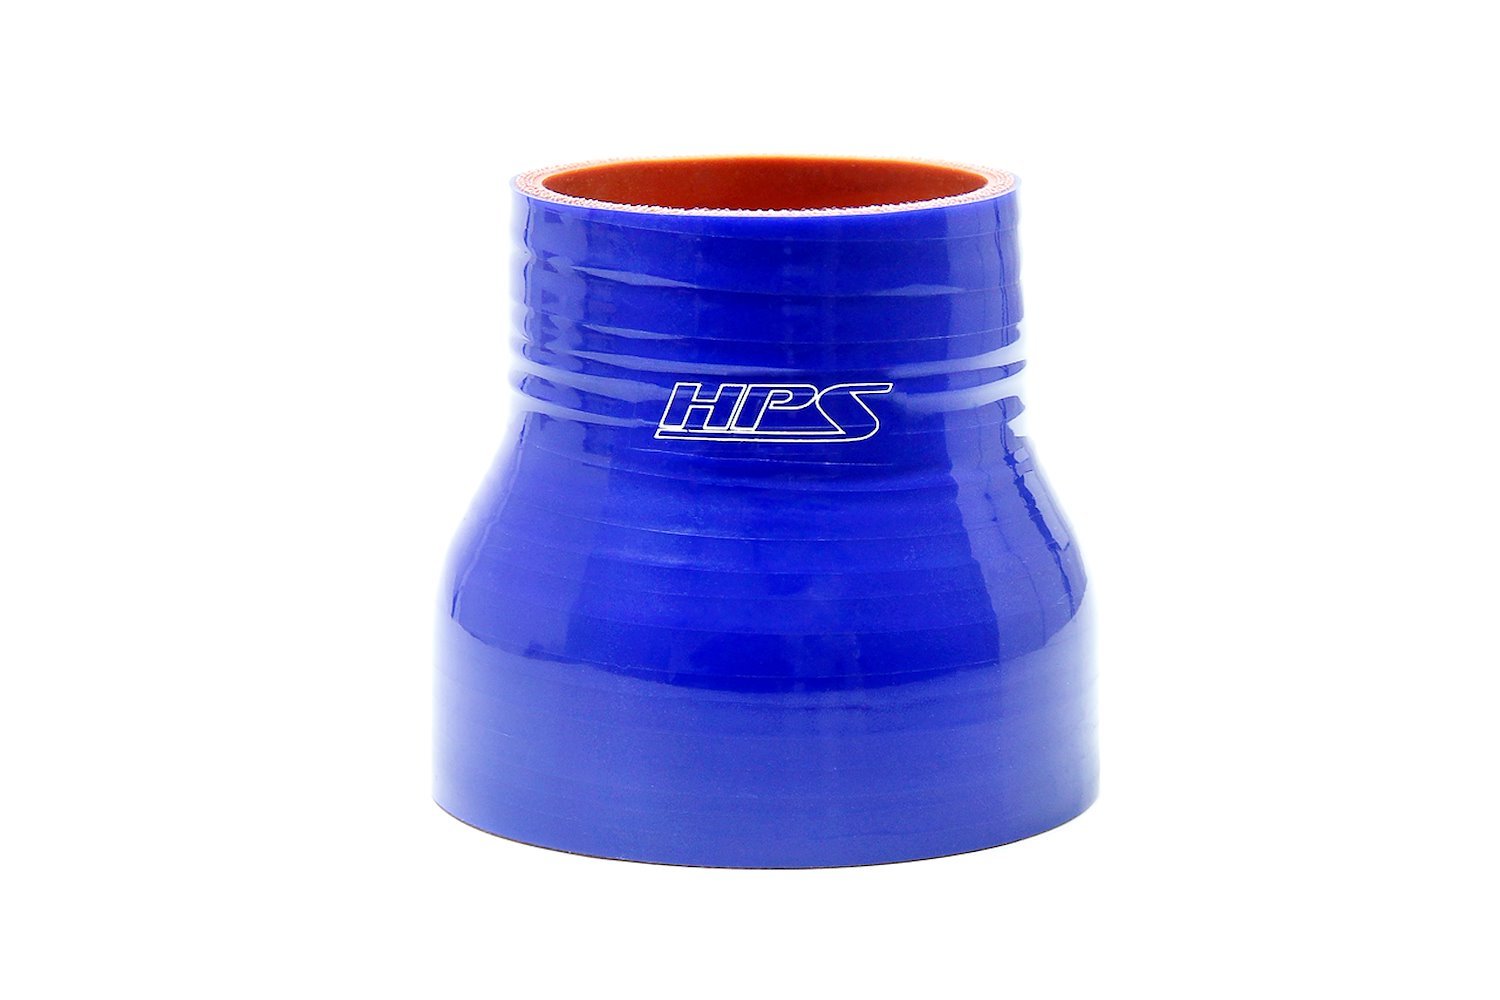 HTSR-200-225-L225-BLUE Silicone Reducer Hose, High-Temp 4-Ply Reinforced, 2 in. - 2-1/4 in. ID, 2-1/4 in. Long, Blue